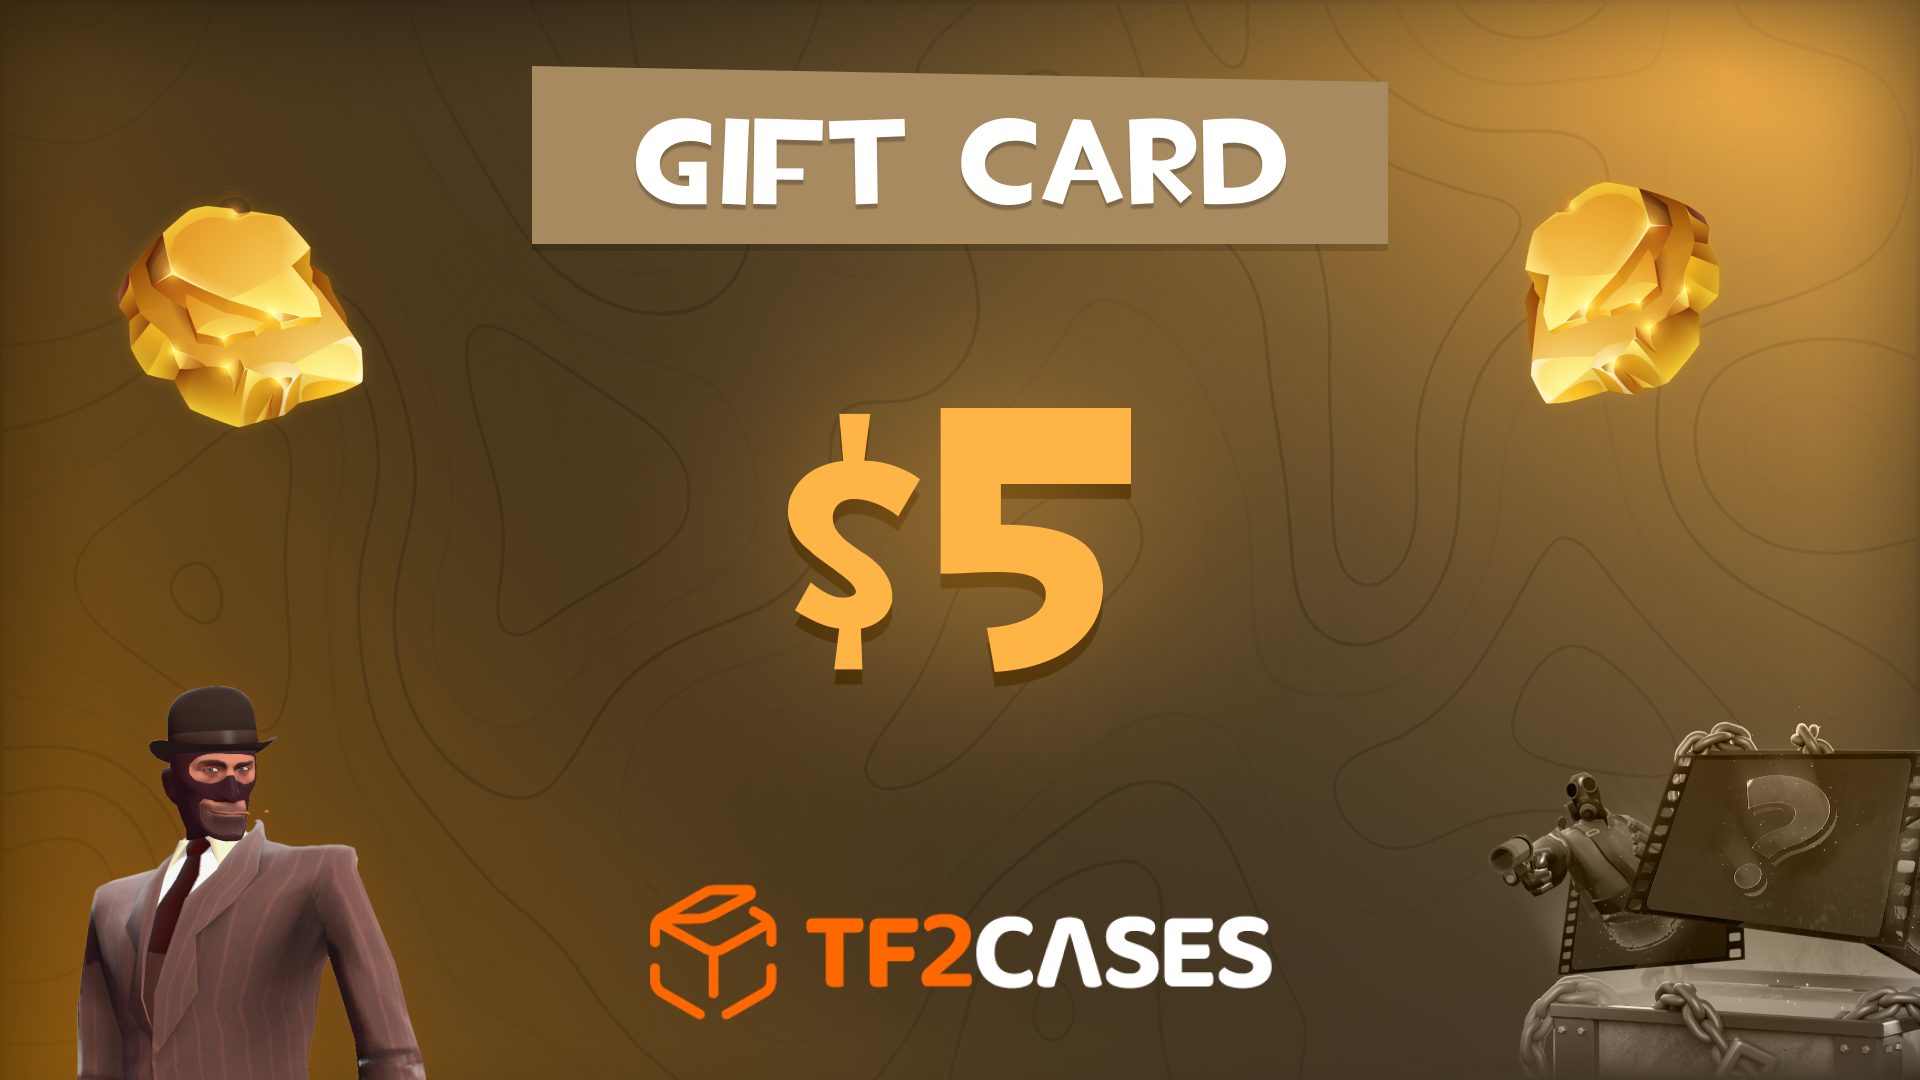 TF2CASES.com $5 Gift Card 5.65 usd